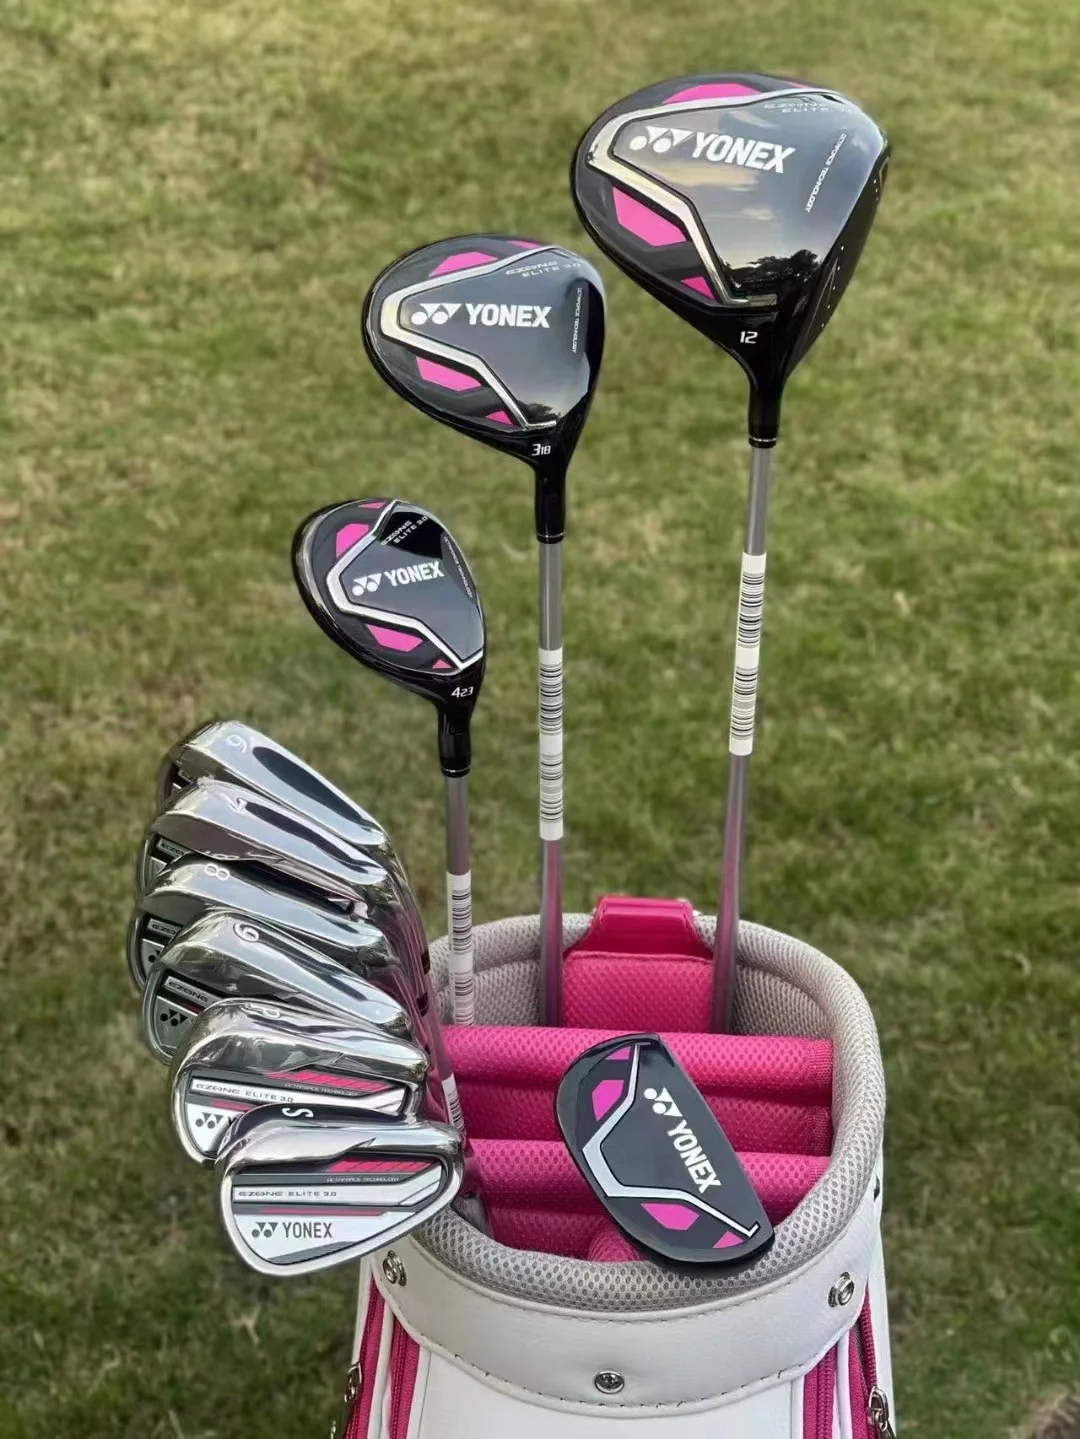 Women Golf Clubs Complete Set YONEX New Style Full Set 12 Degree L Flex With Graphite Shaft With Headcover No Bag